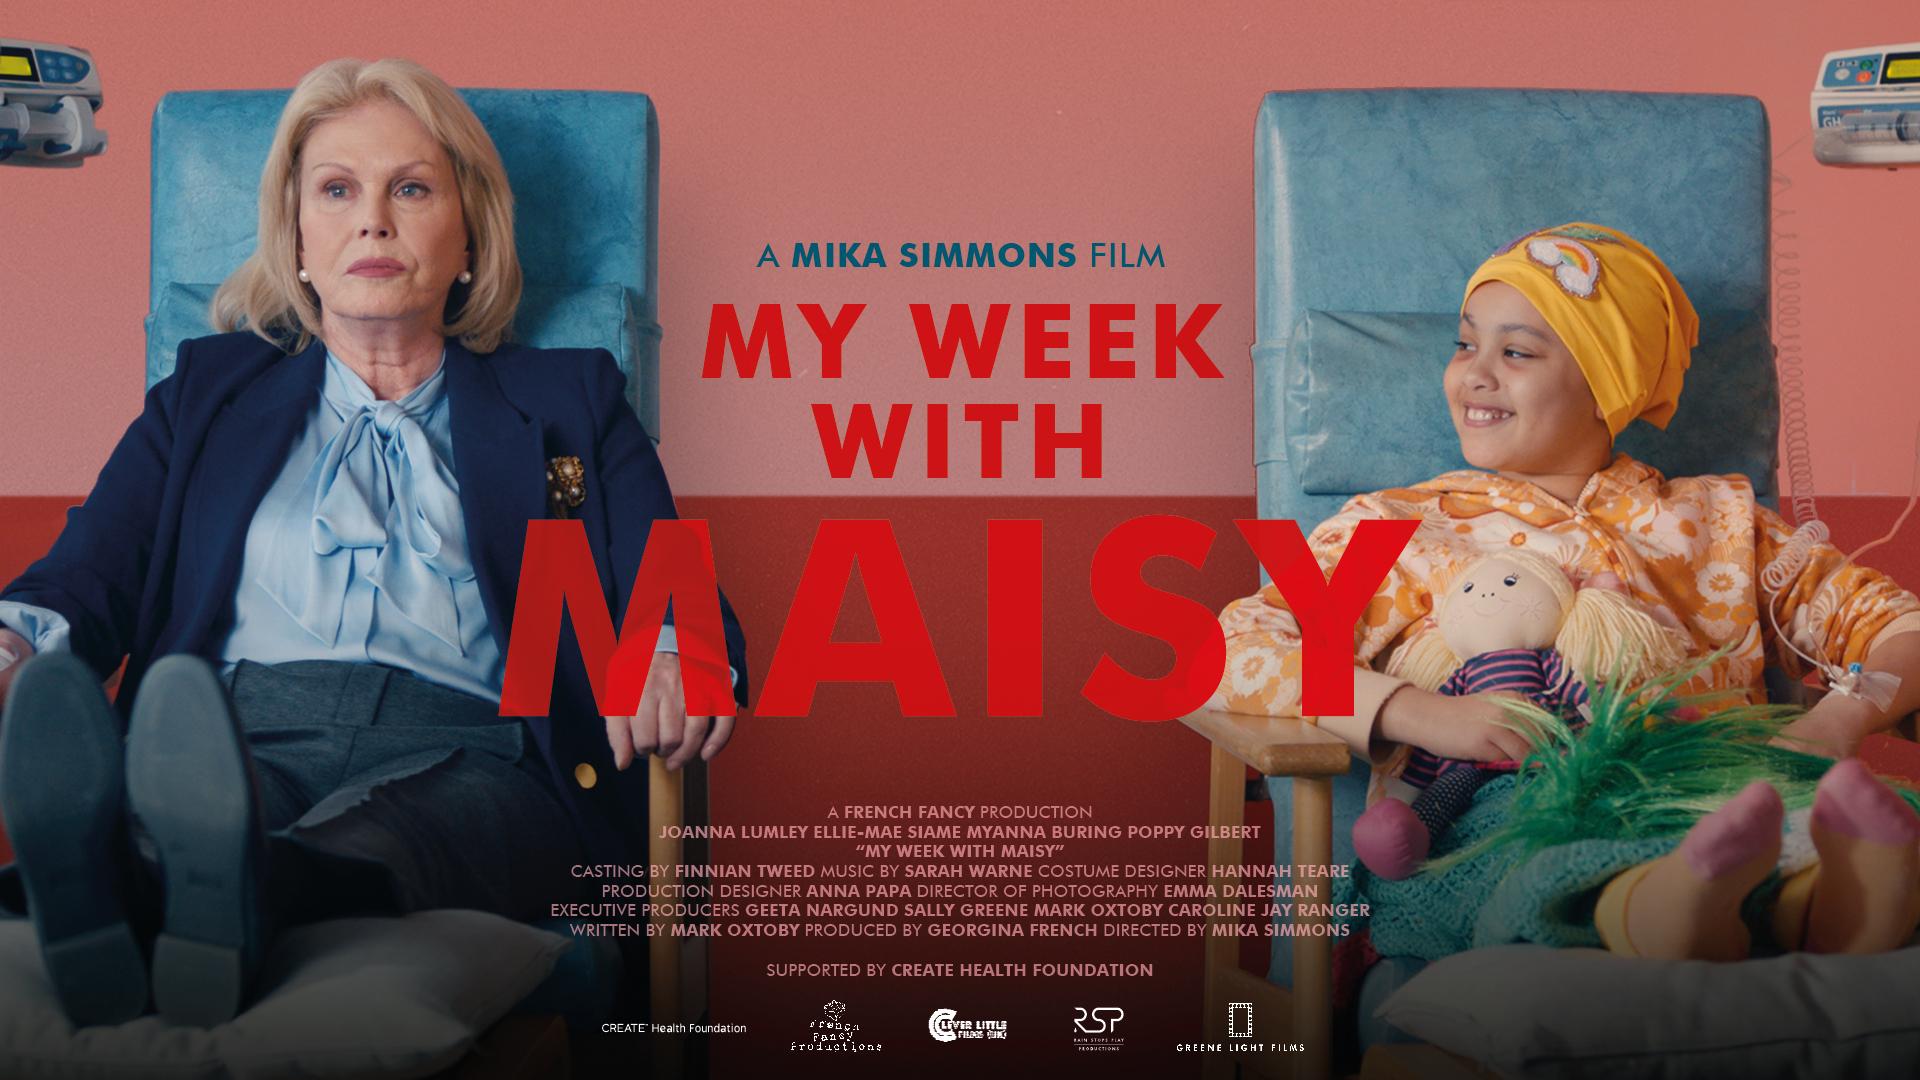 My Week with Maisy